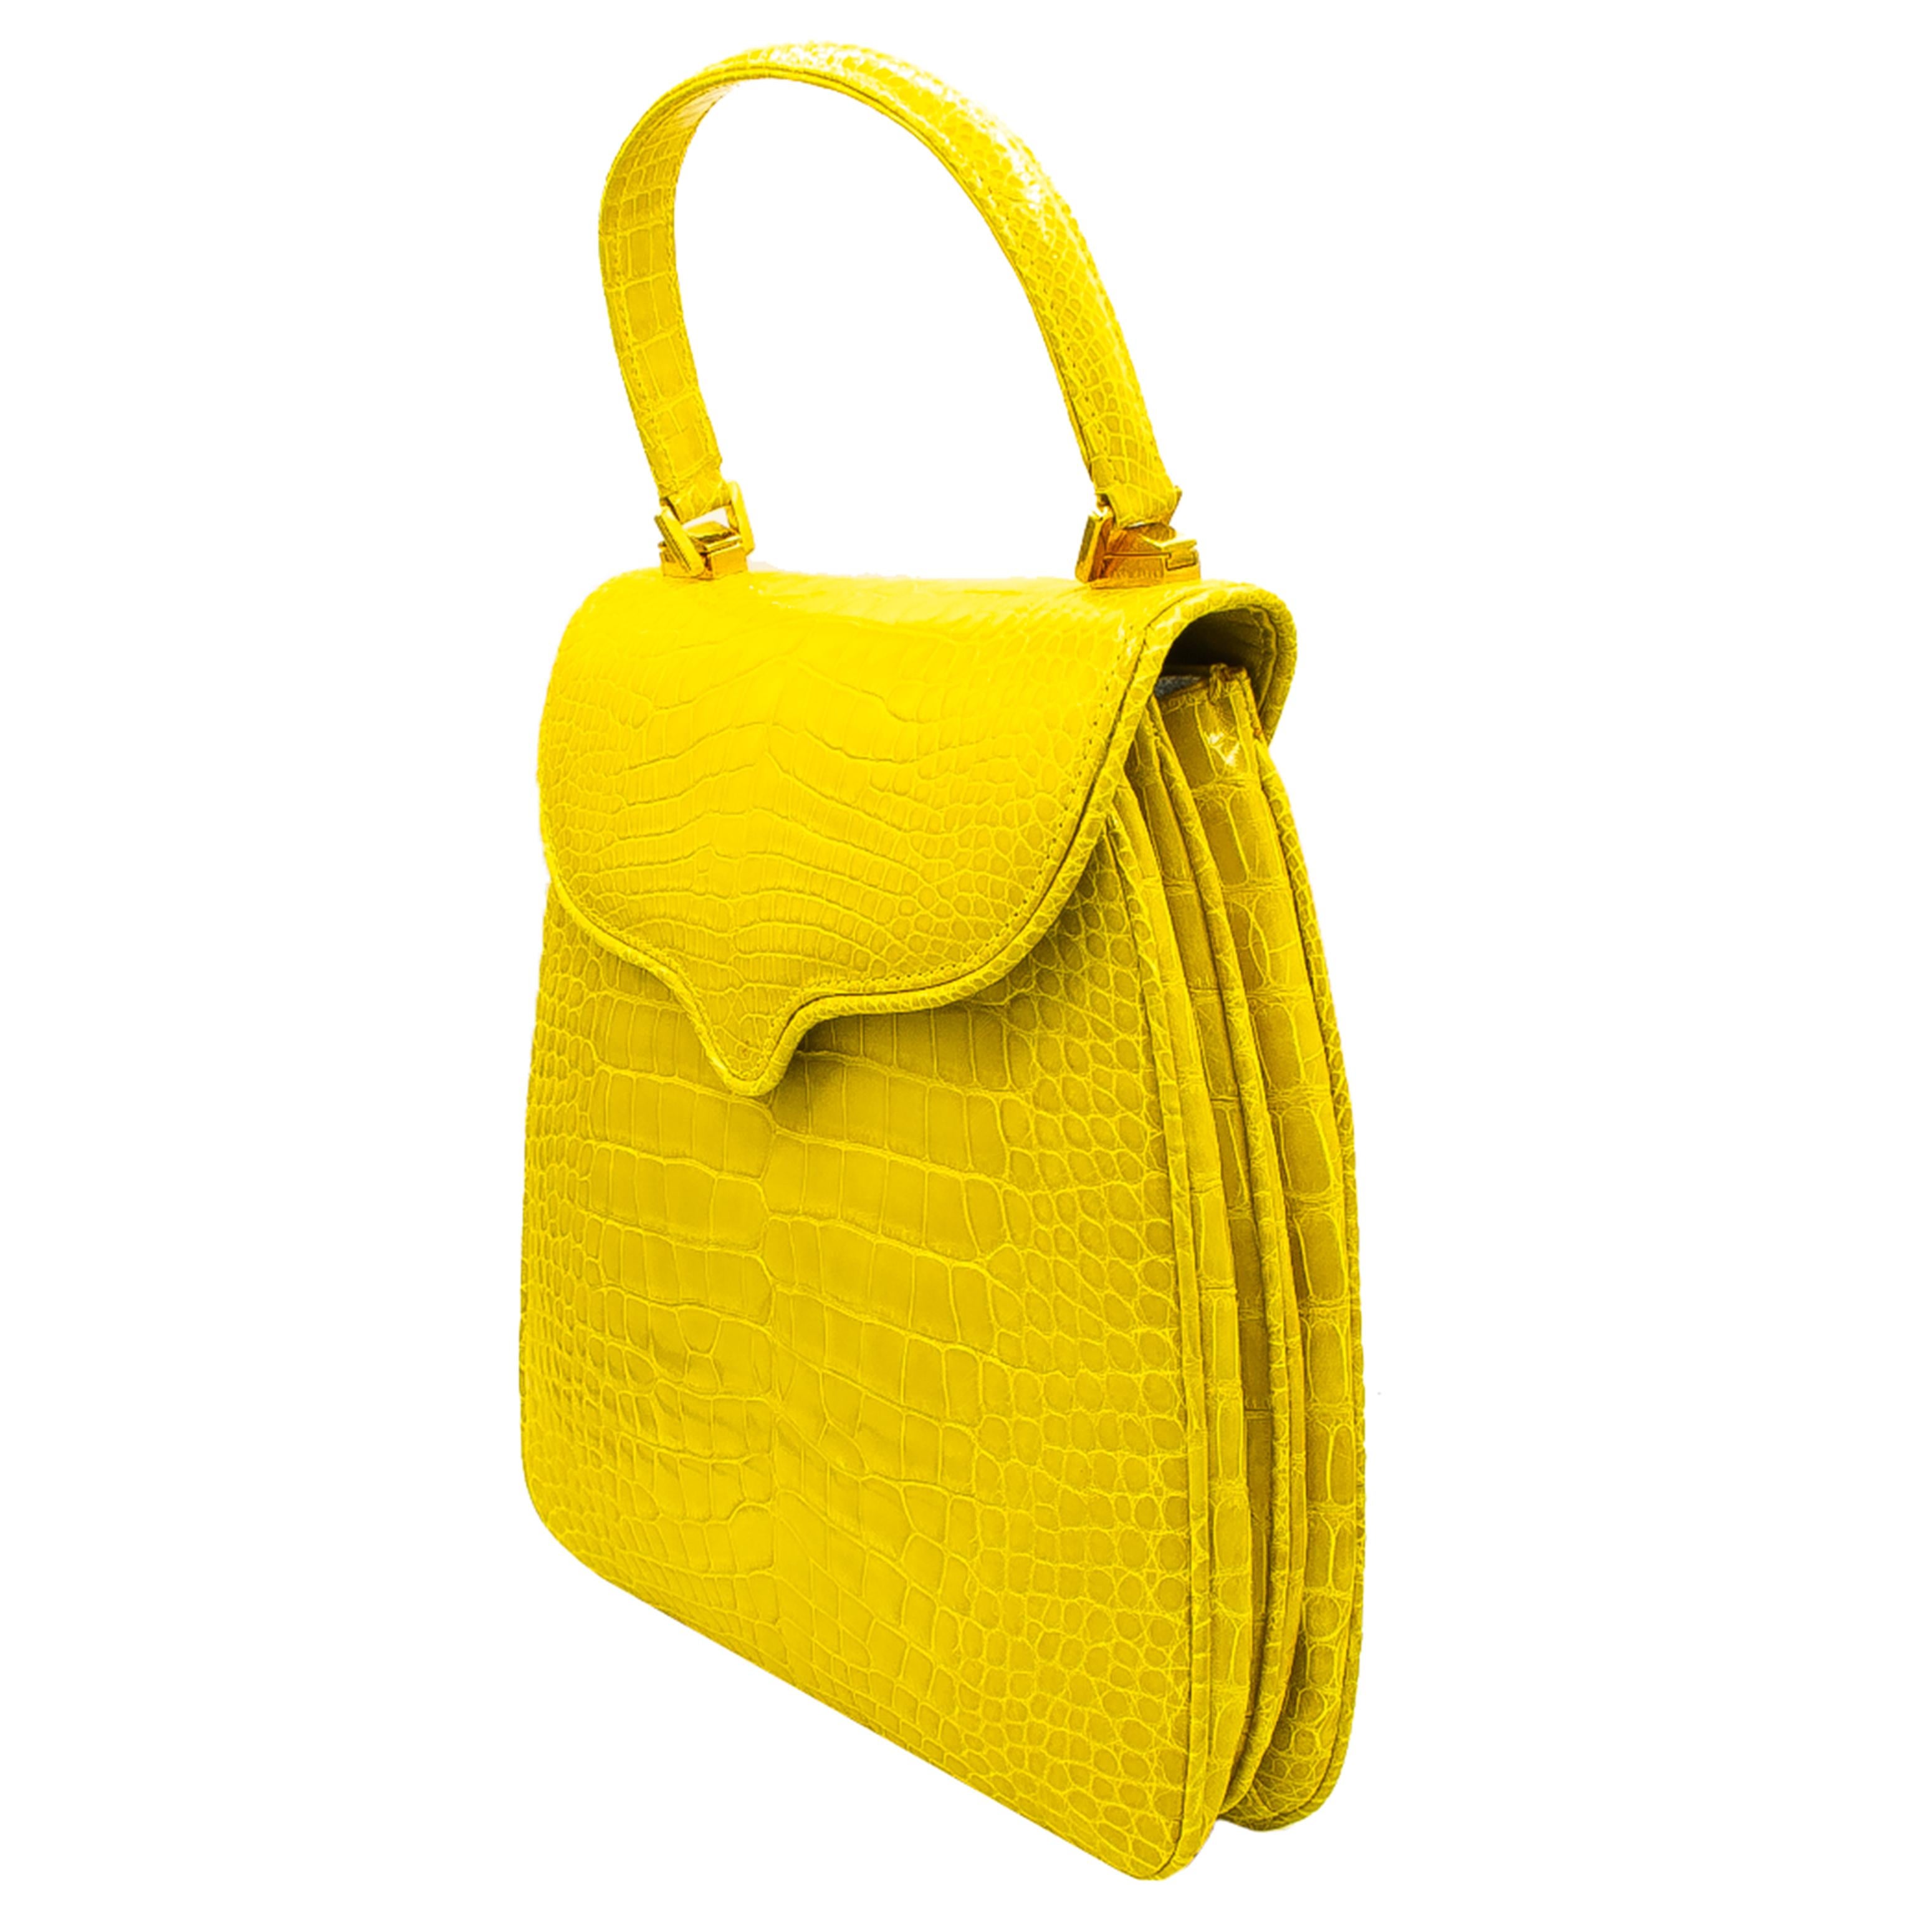 Crazy fun lemon crocodile handbag with rose gold color hardware. This Bag has 2 main pockets, 1 small side pocket, a small zippered section and an exterior pocket. Handle can be removed. Made in Italy. Originally sold for $9,800 retail. This is a